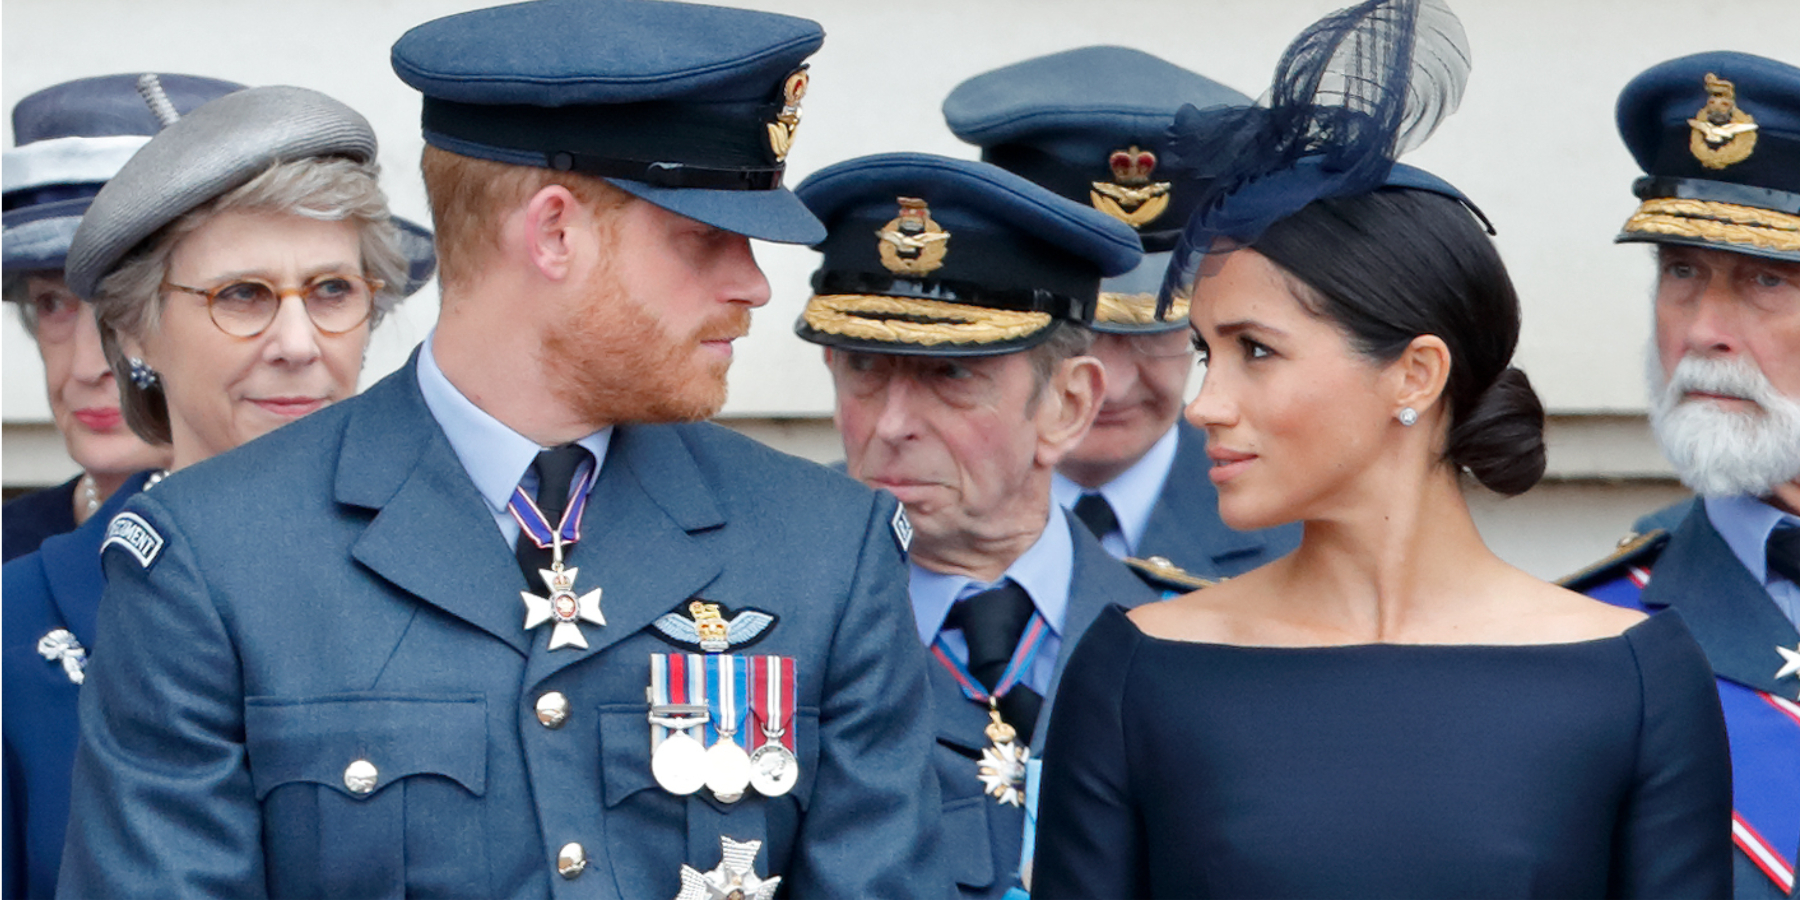 Prince Harry and Meghan Markle attend a ceremony to mark the centenary of the Royal Air Force on the forecourt of Buckingham Palace on July 10, 2018 in London, England.